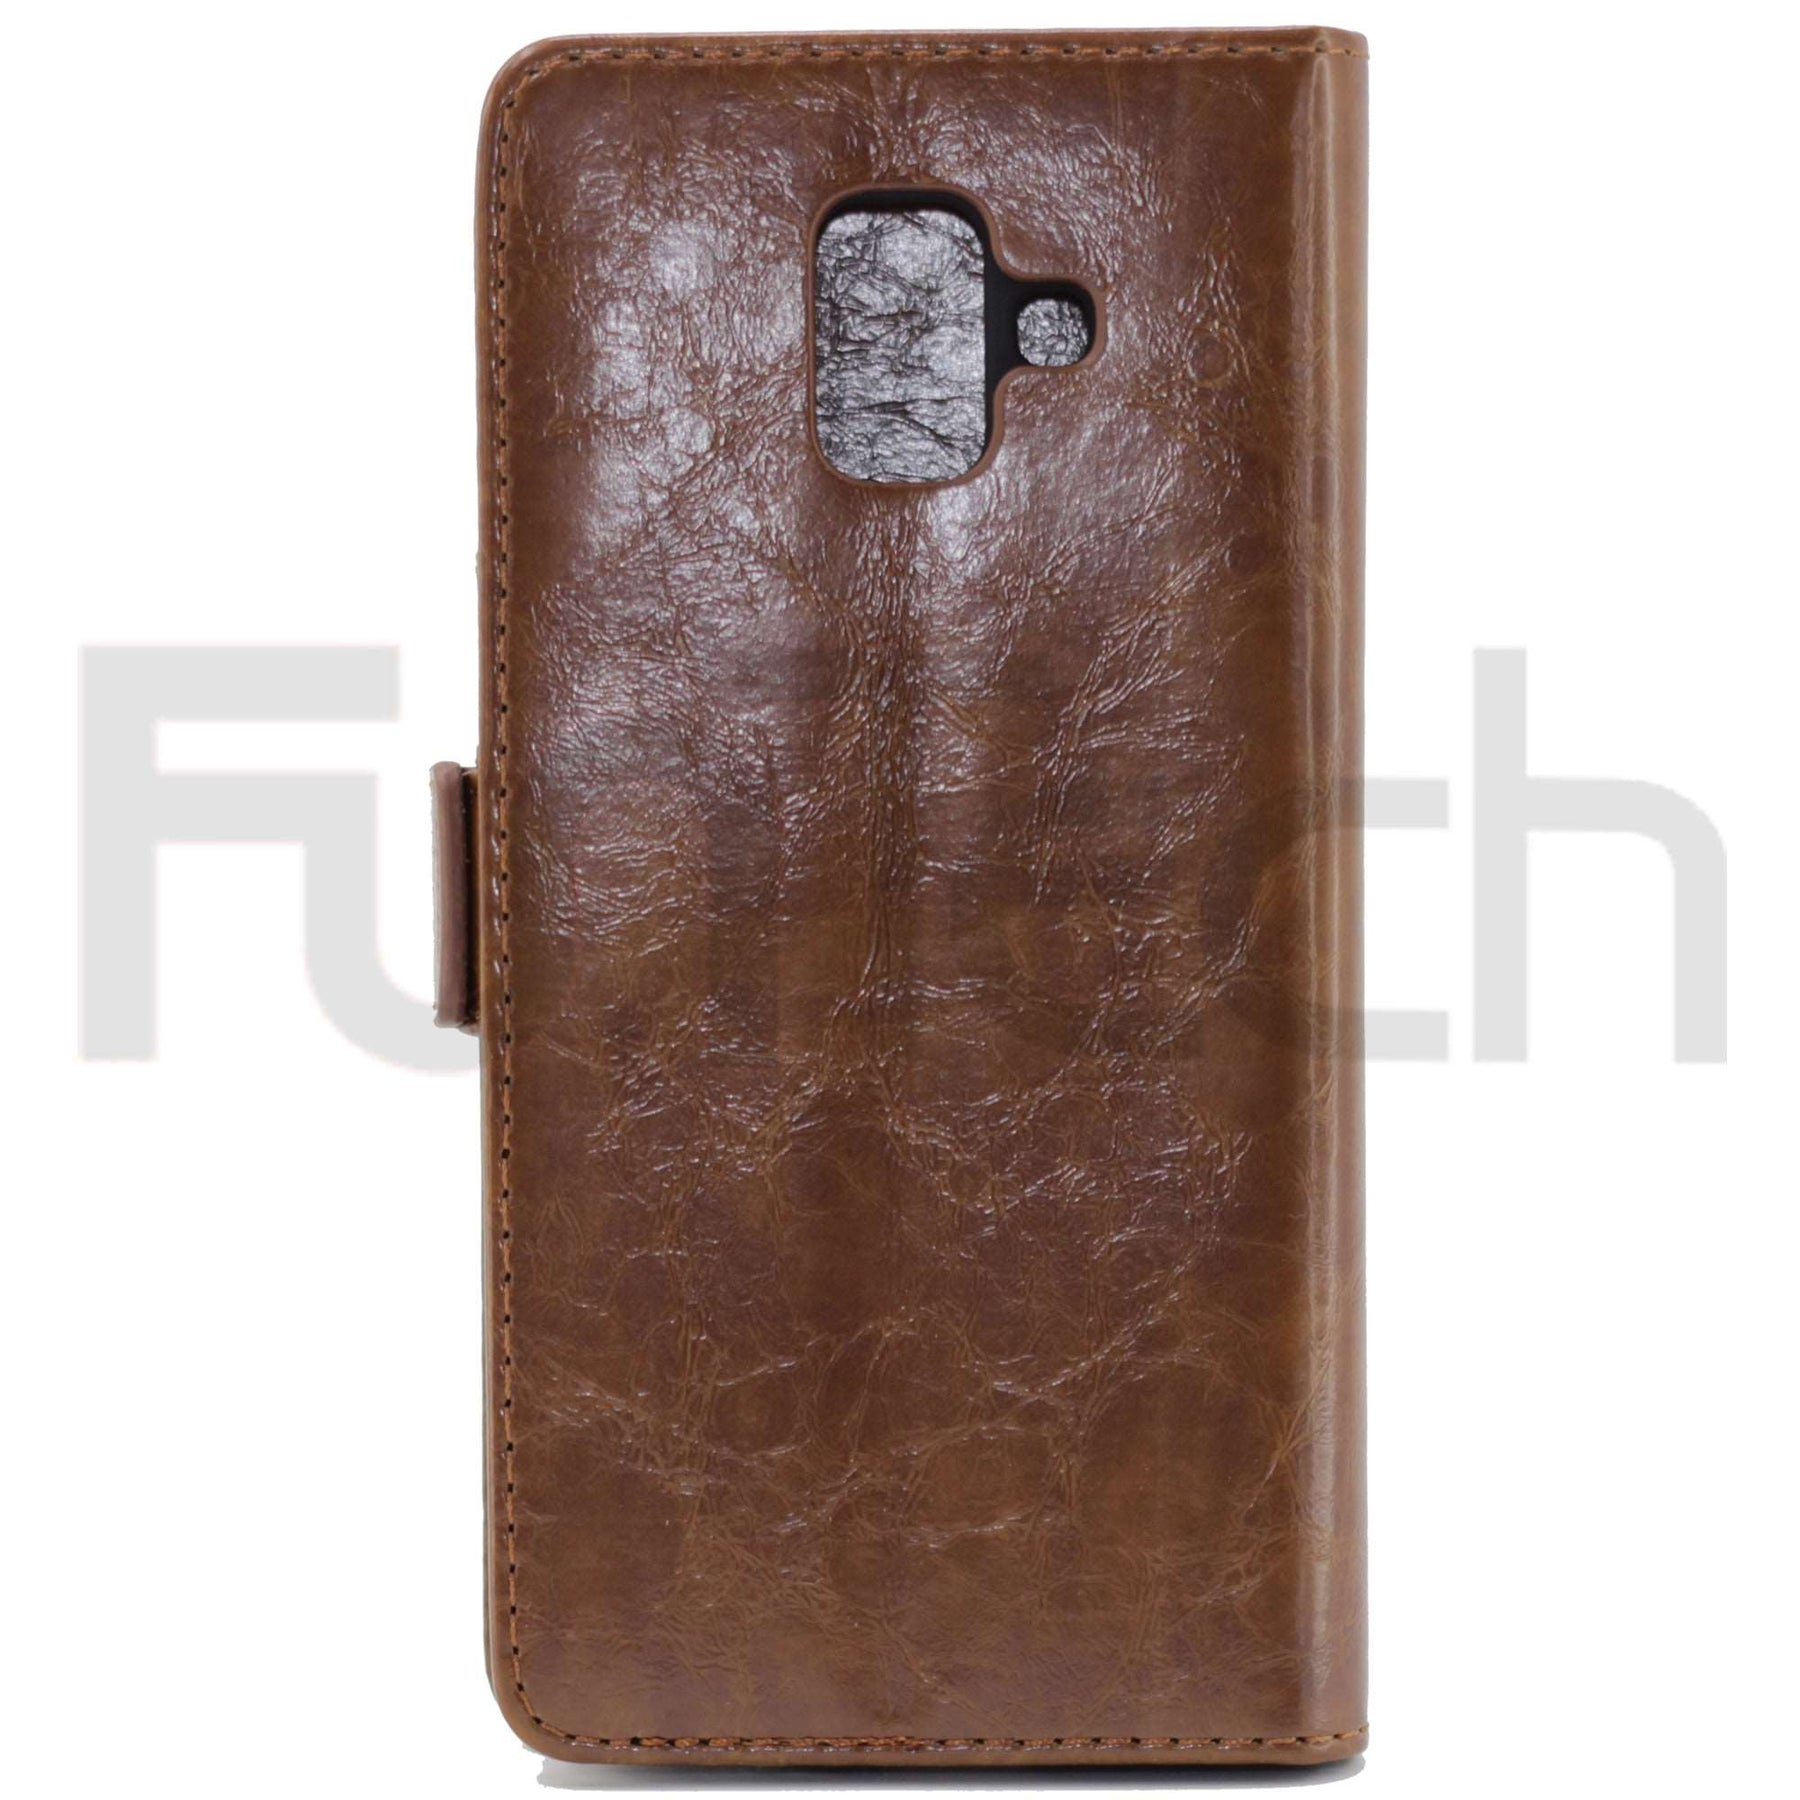 Samsung A6 2018, Leather Wallet Case, Color Brown.